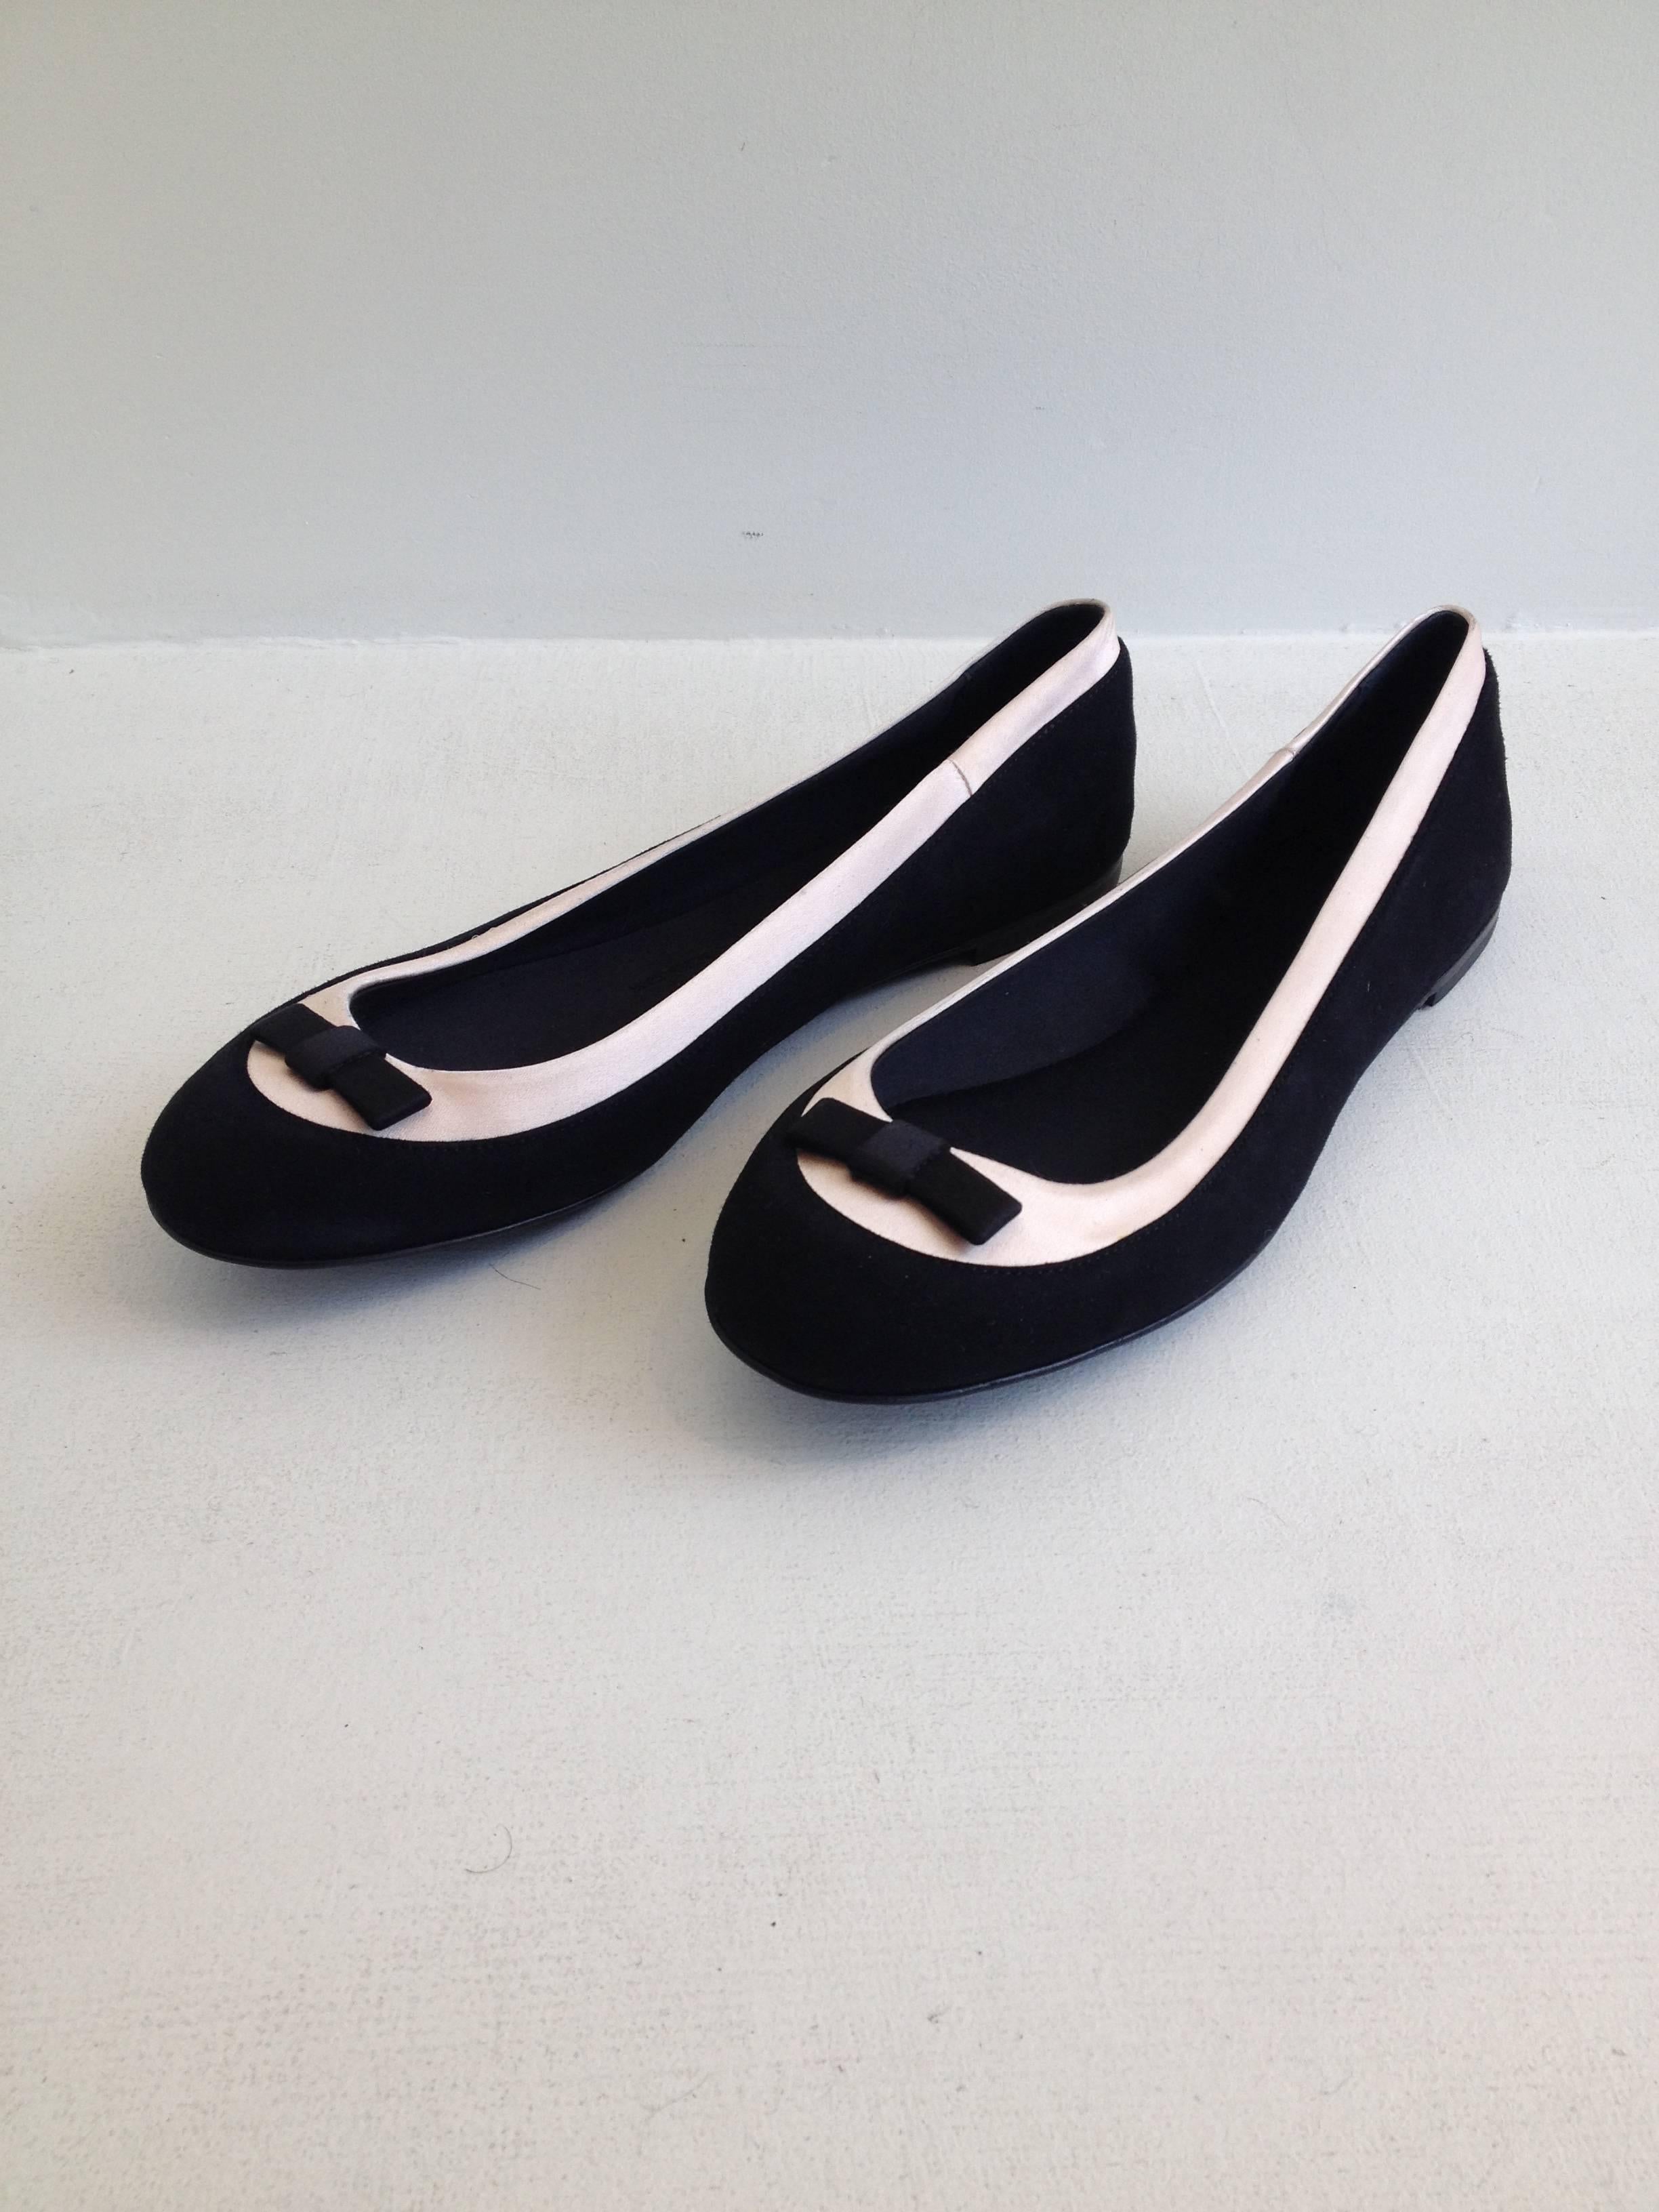 Giuseppe Zanotti Black and Pink Satin Ballerina Flats Size 38 (7.5) In New Condition For Sale In San Francisco, CA